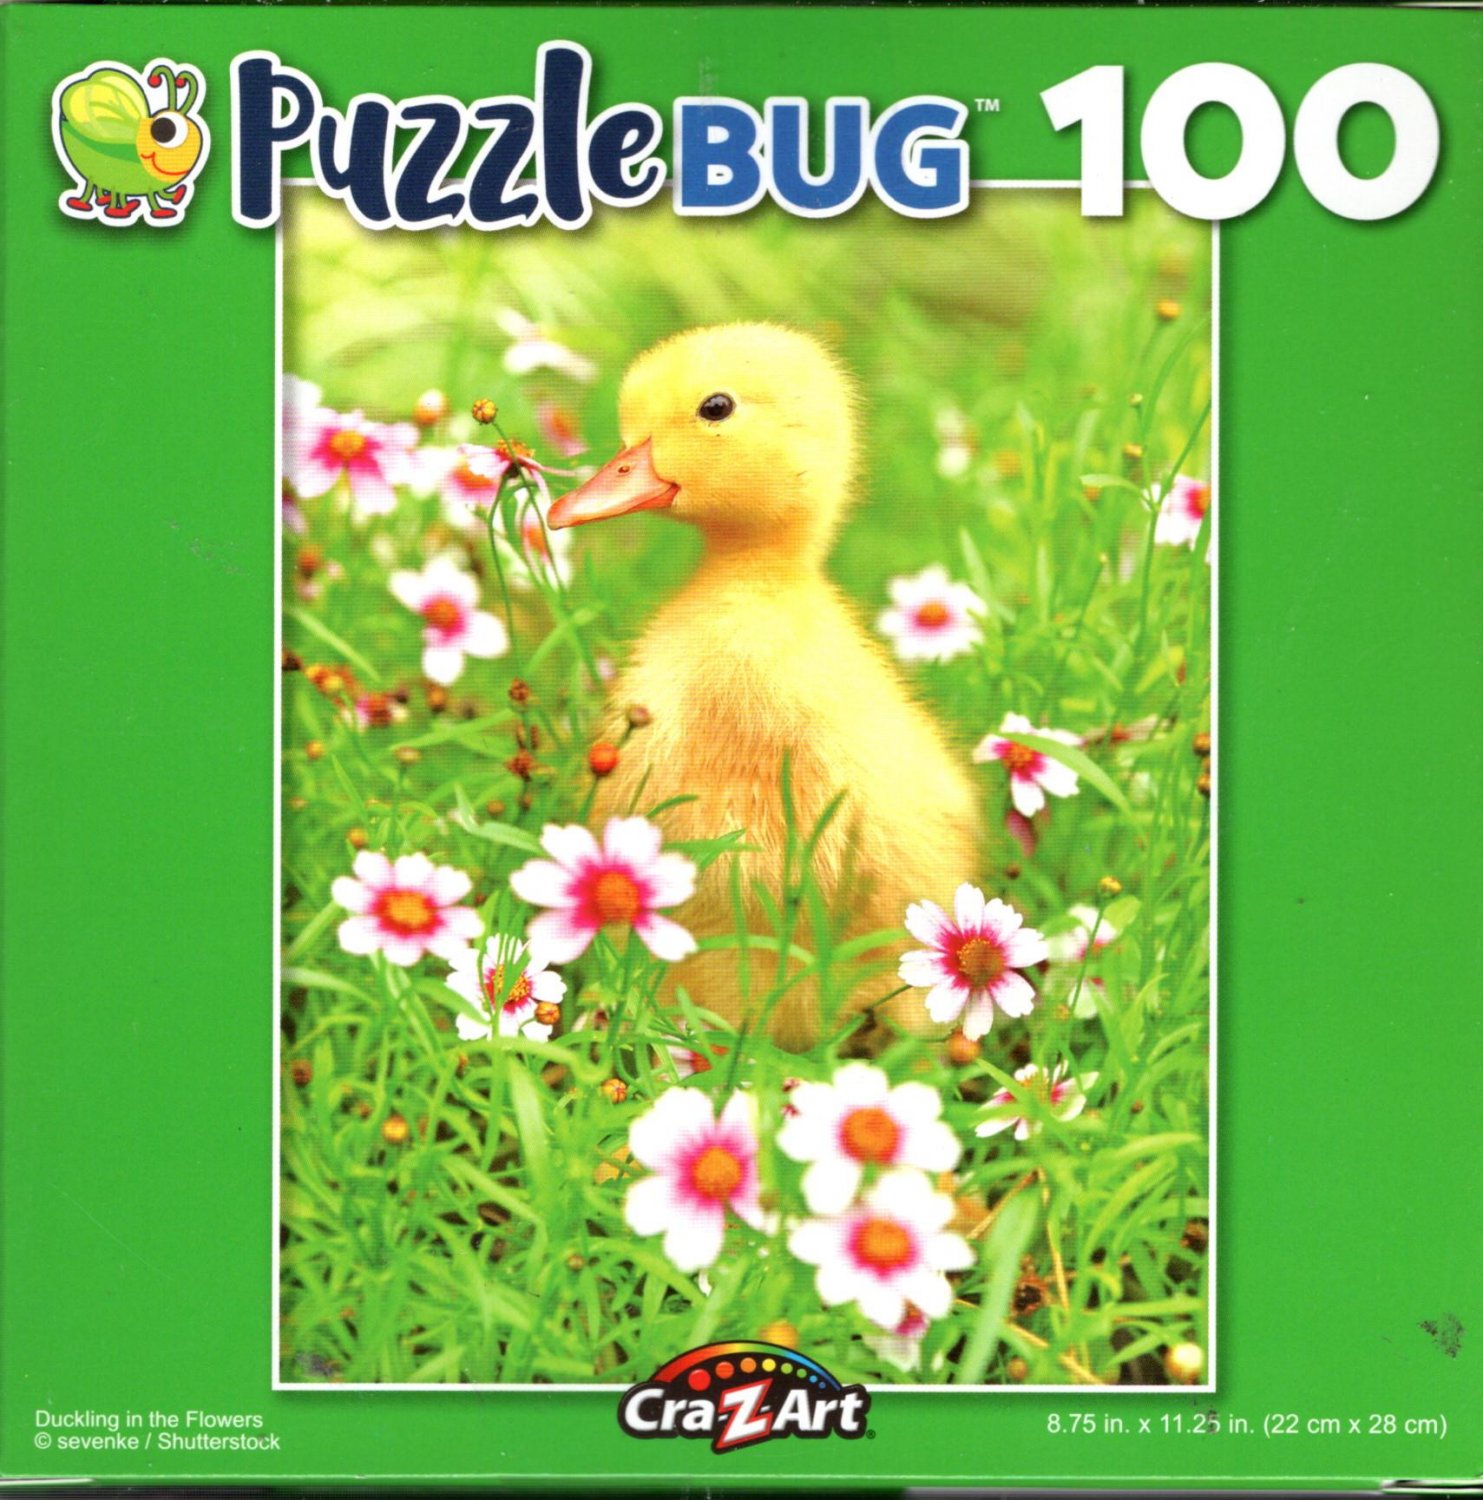 Duckling in the Flowers - 100 Piece Jigsaw Puzzle